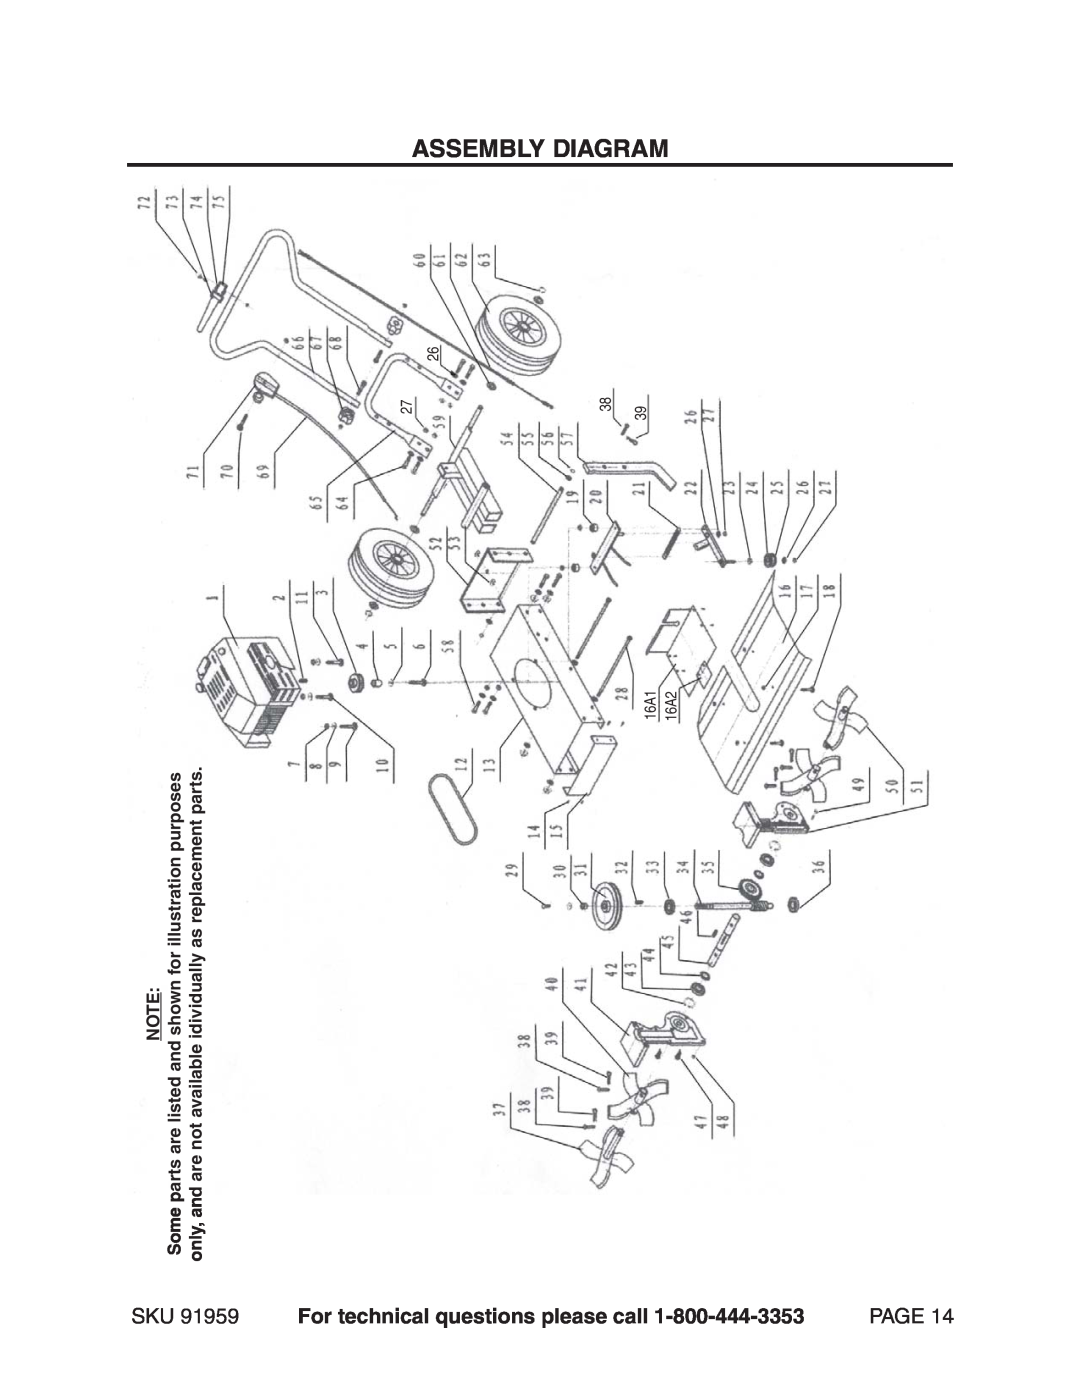 Harbor Freight Tools 91959 Assembly Diagram, Page, illustration purposes, as replacement parts, shown for, idividually 